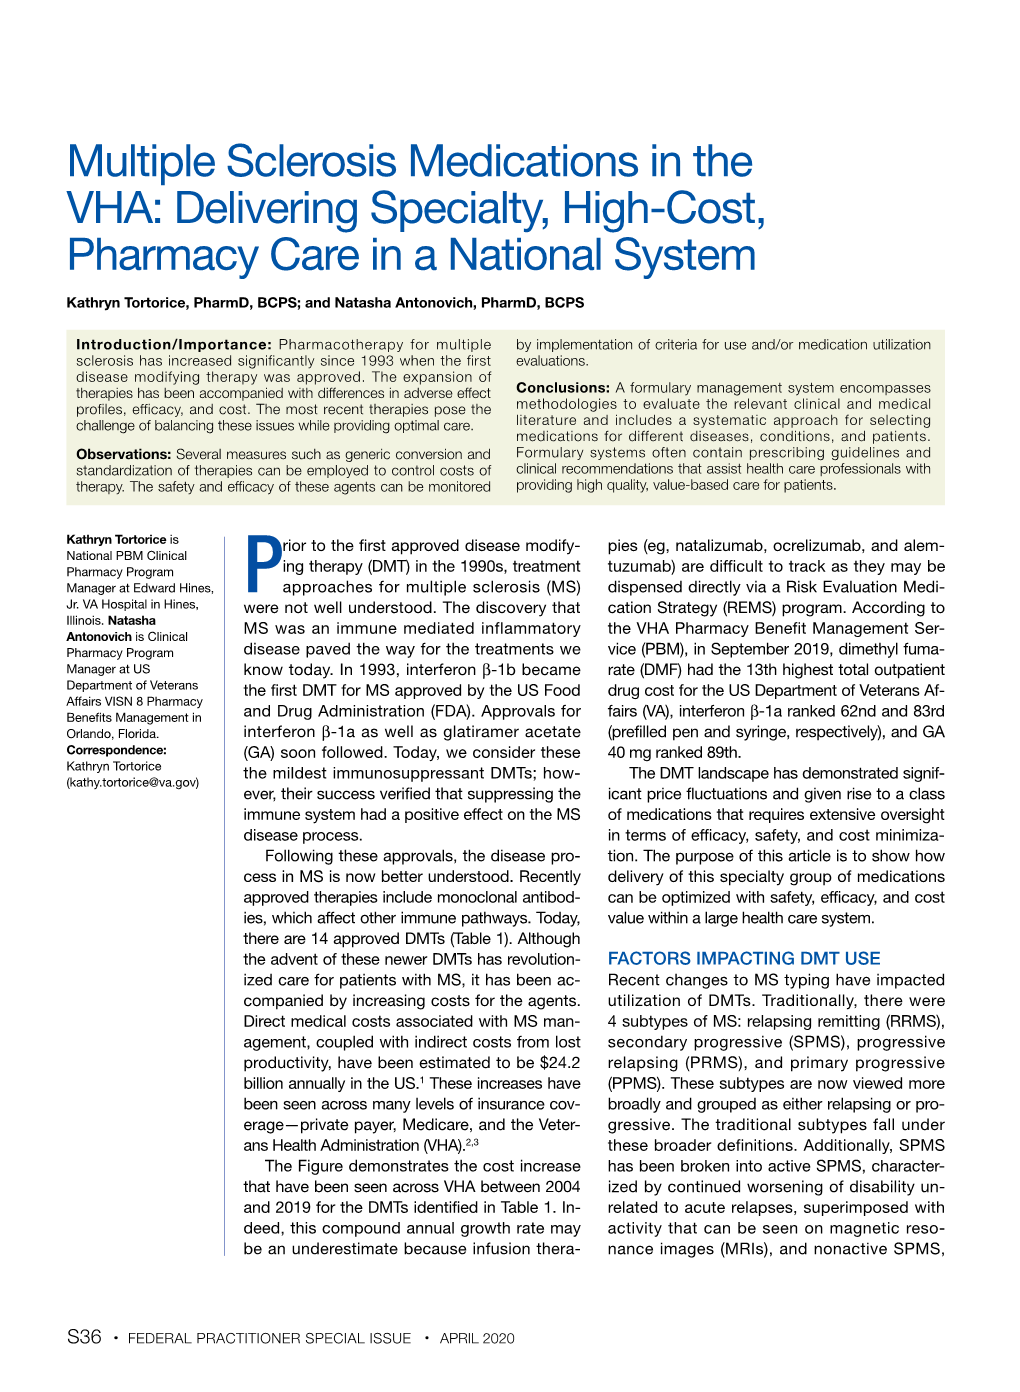 Multiple Sclerosis Medications in the VHA: Delivering Specialty, High-Cost, Pharmacy Care in a National System